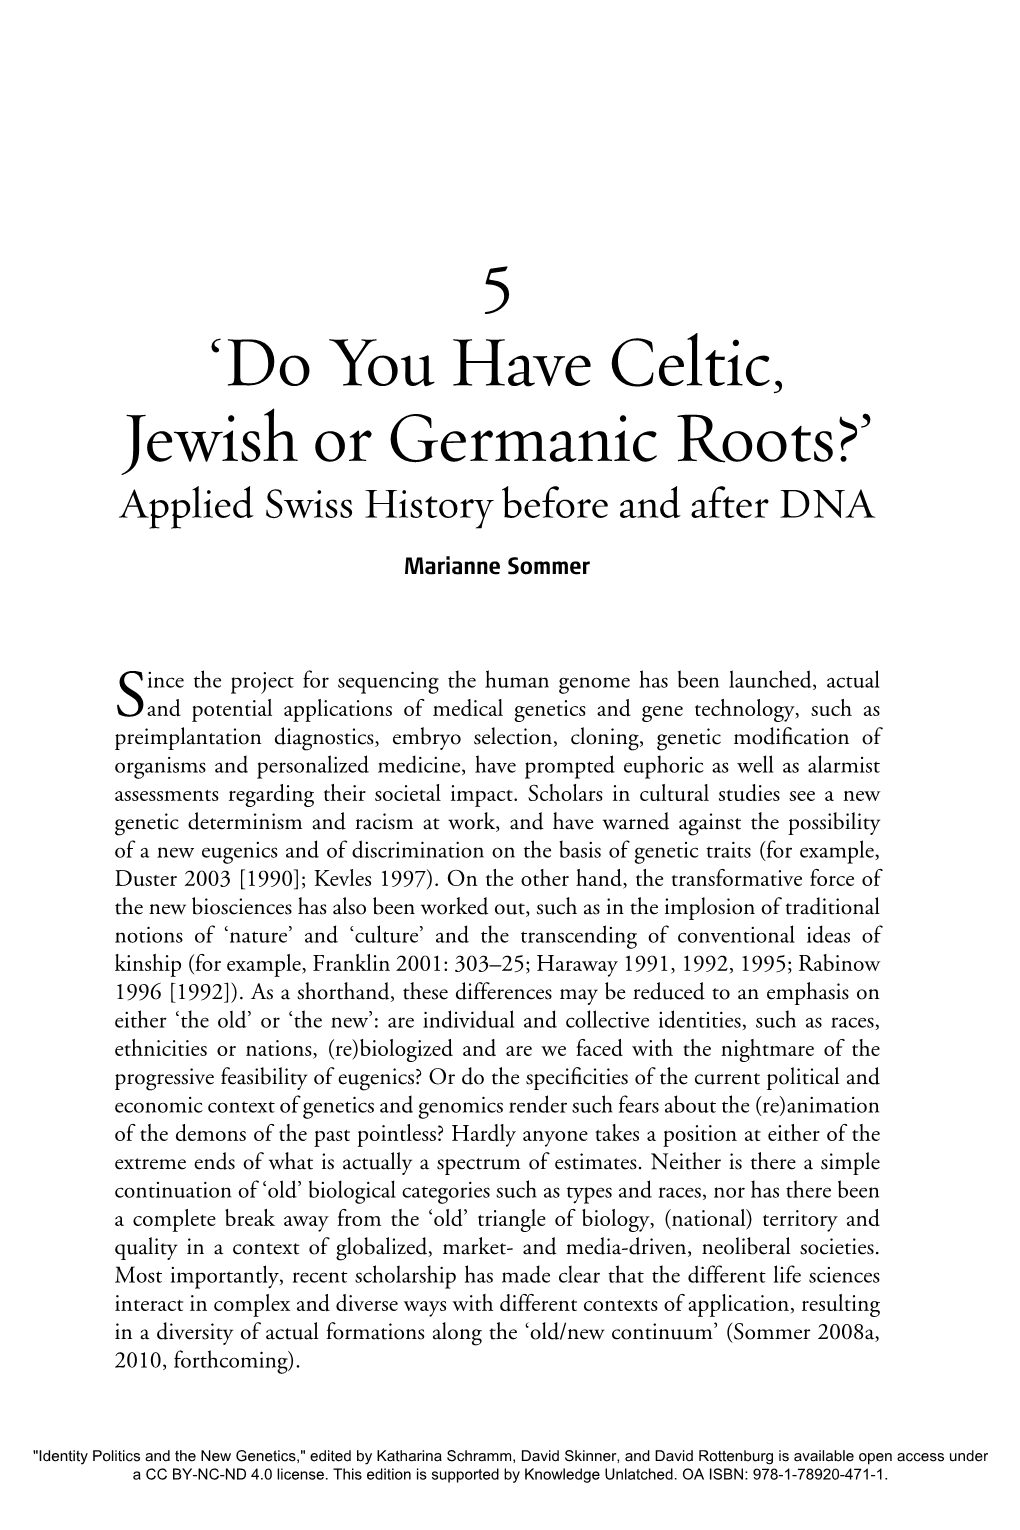 'Do You Have Celtic, Jewish Or Germanic Roots?'